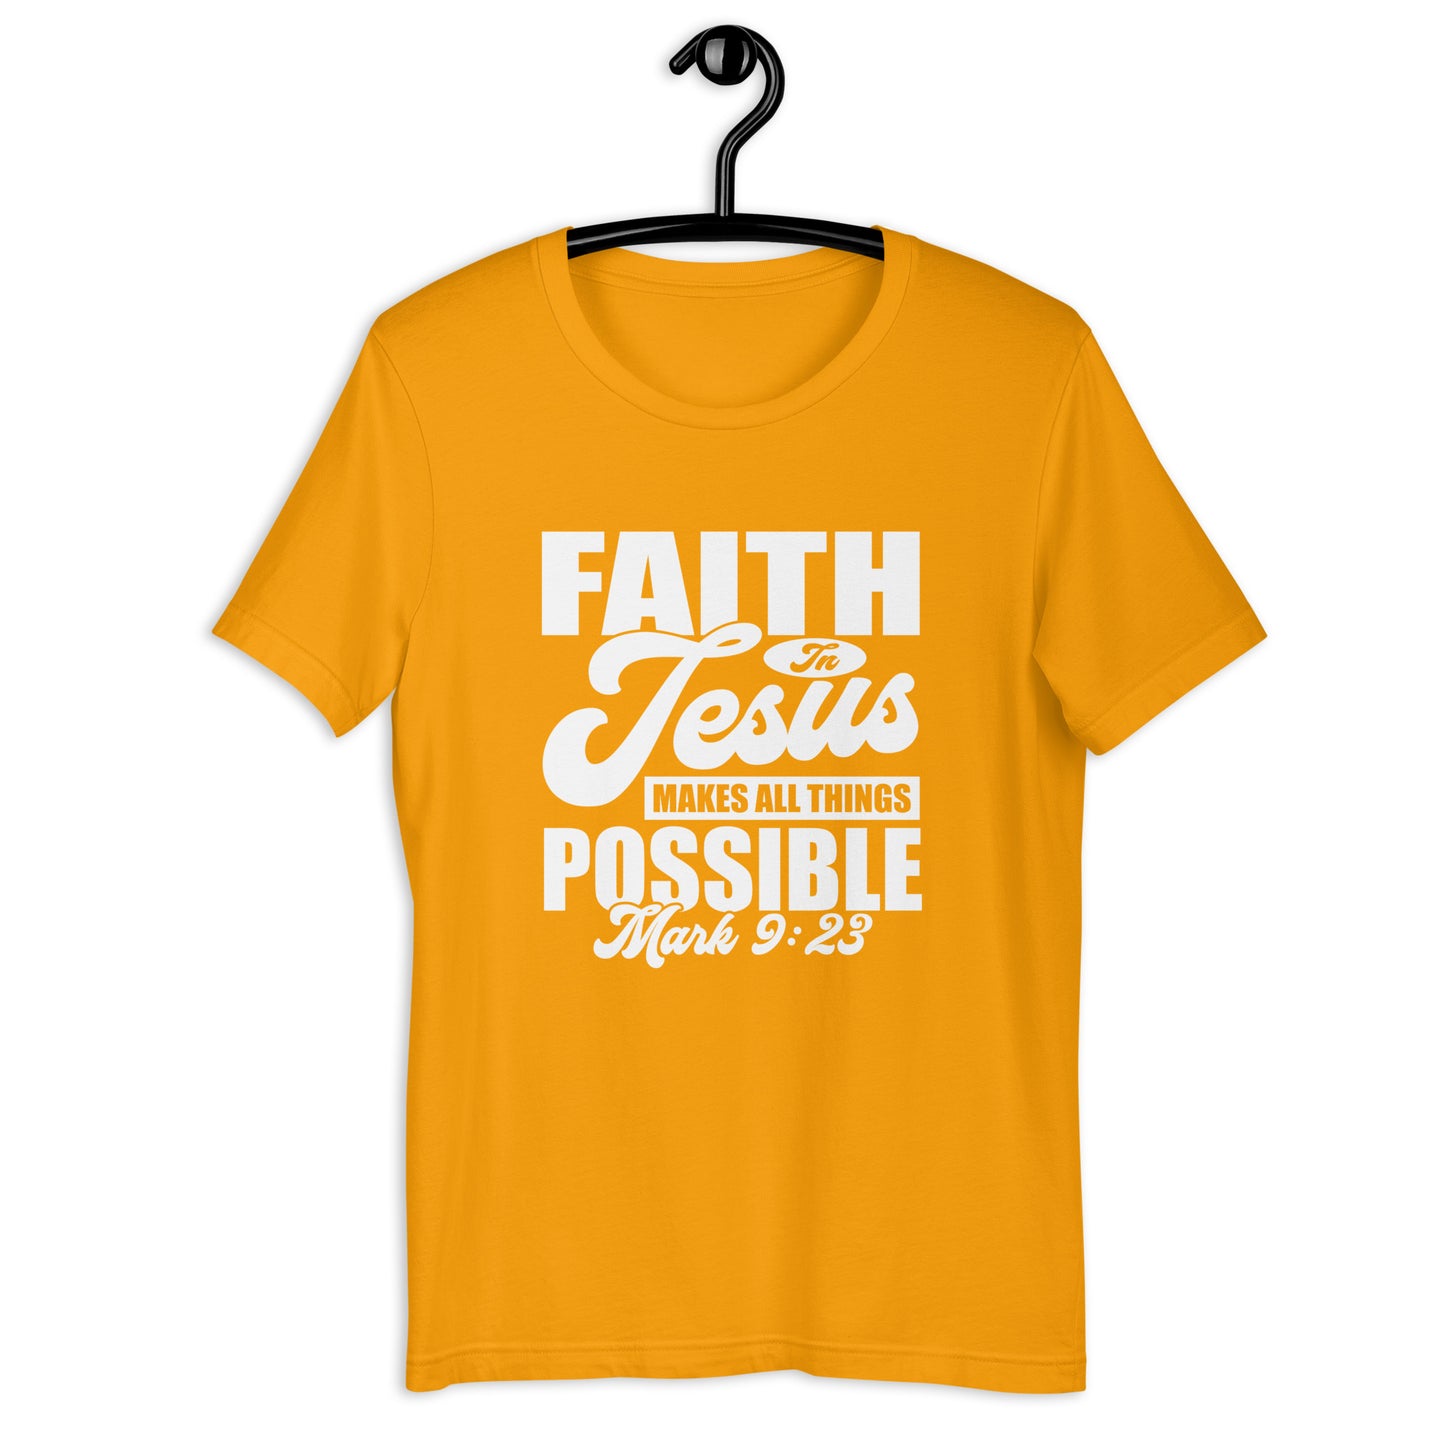 Faith in Jesus Makes All Things Possible T-Shirt Various Colors